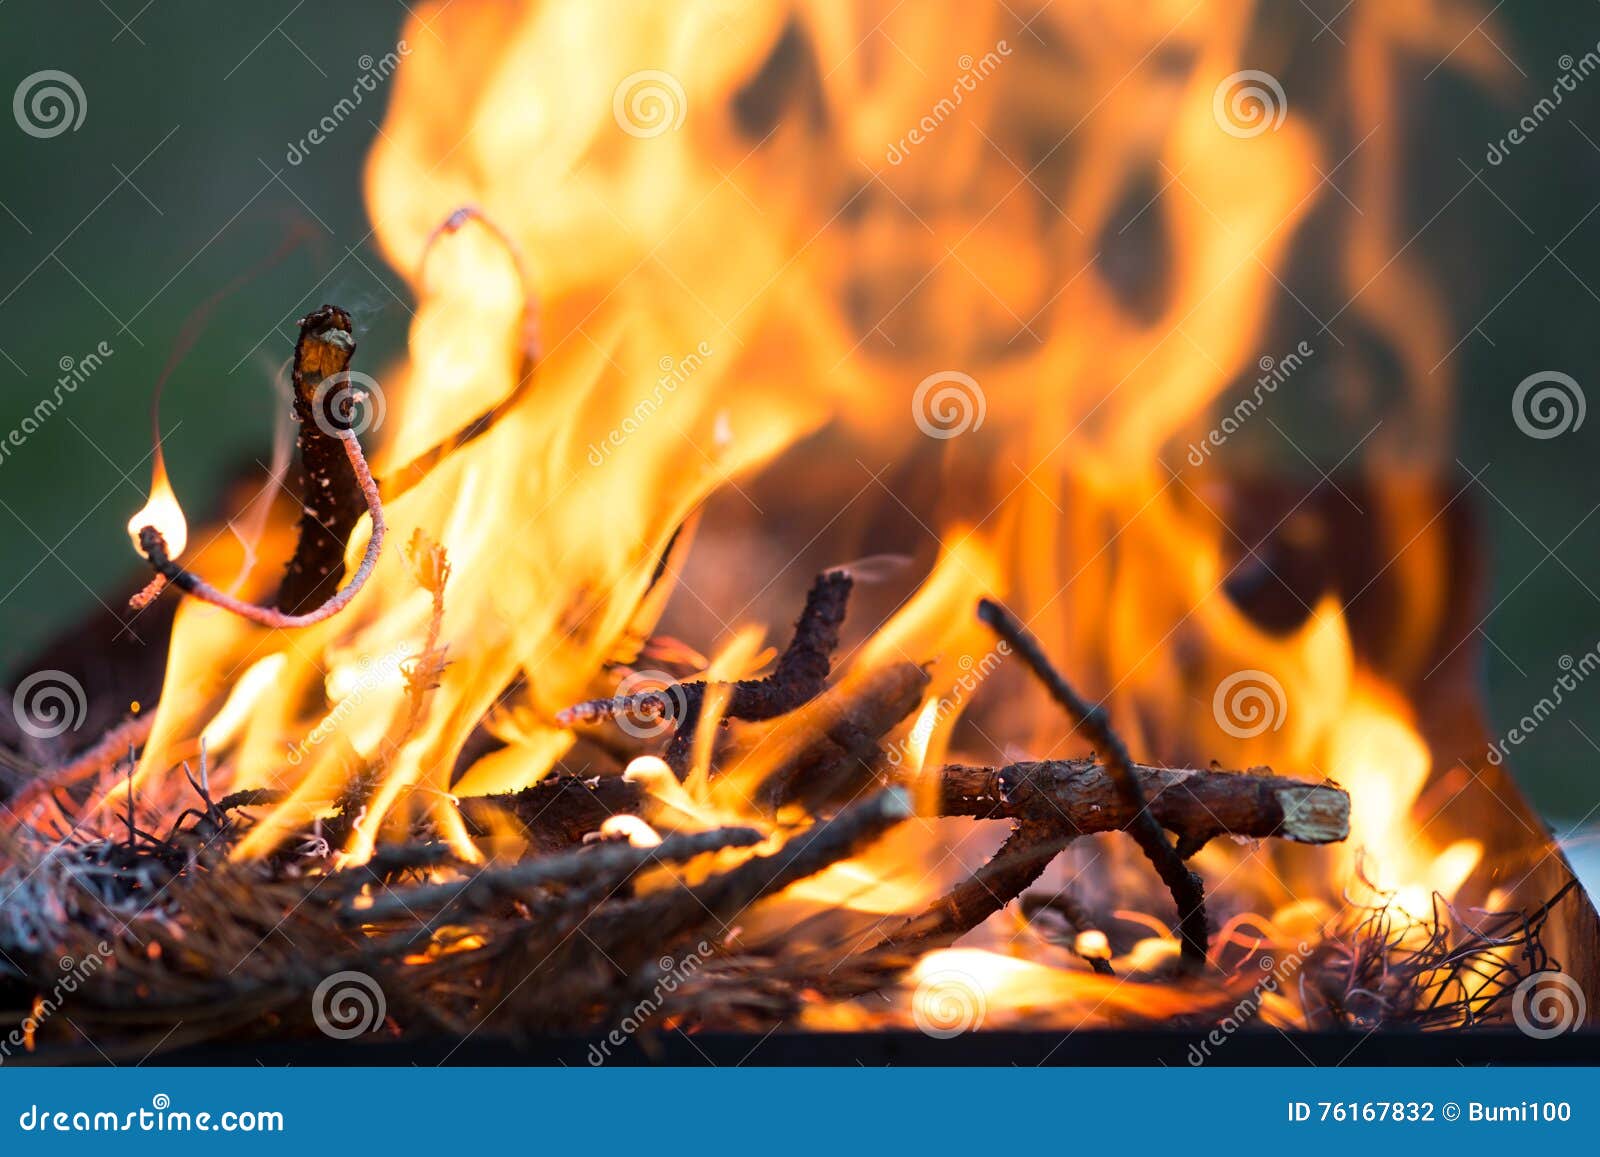 bonfire, burning branches, macor fire and smoke, close-up